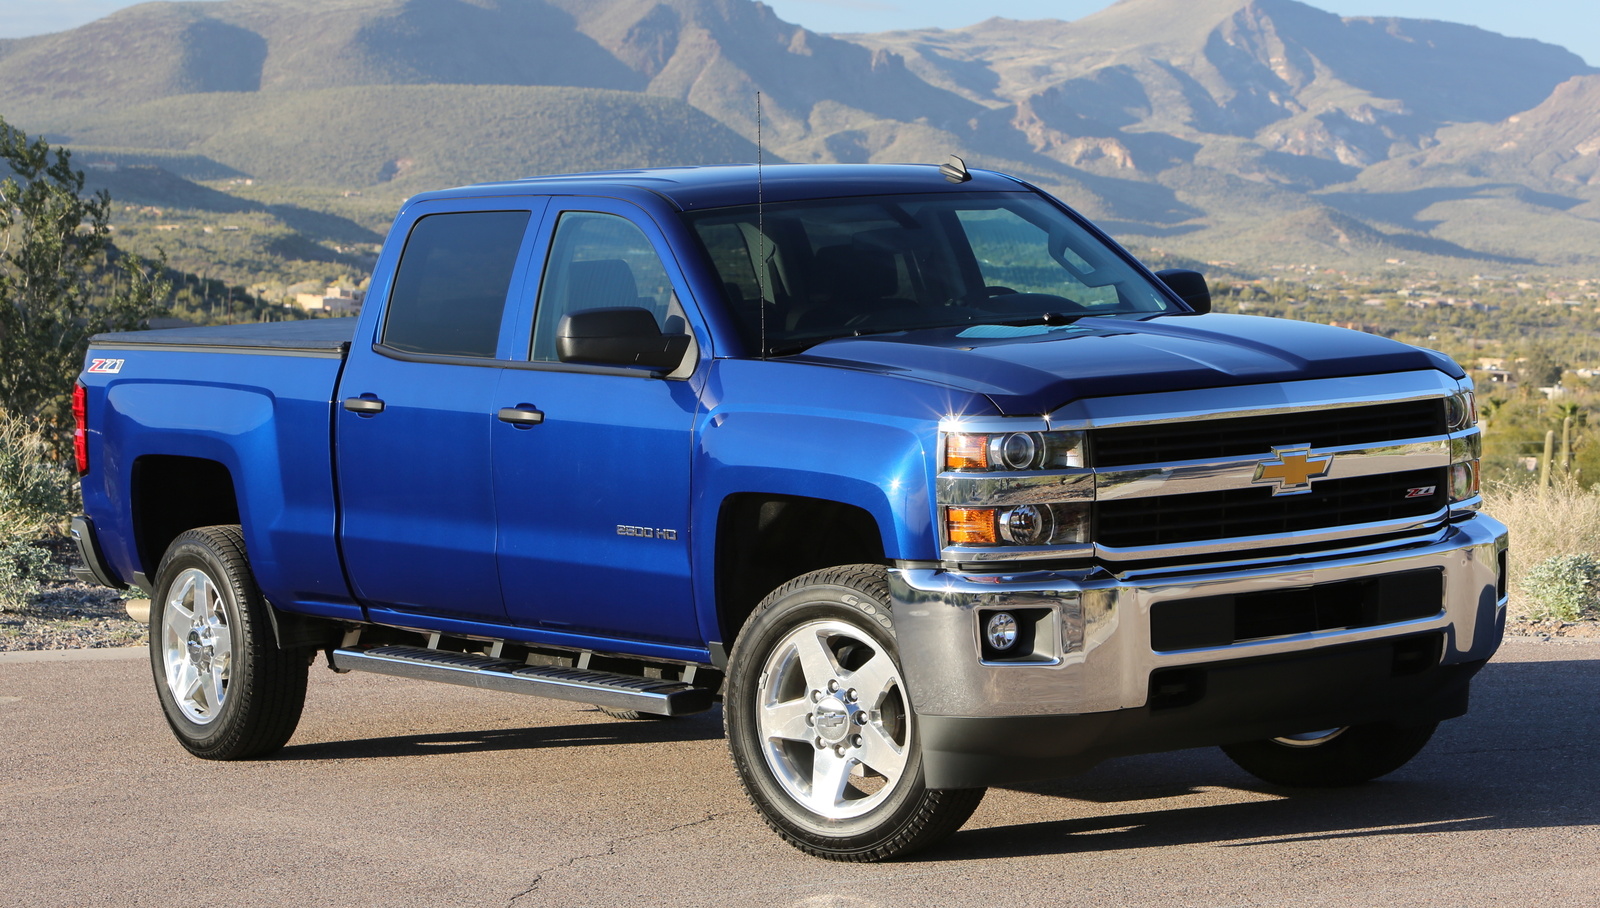 Most Expensive Truck In The World - Chevrolet Silverado 2500 4WD High Country